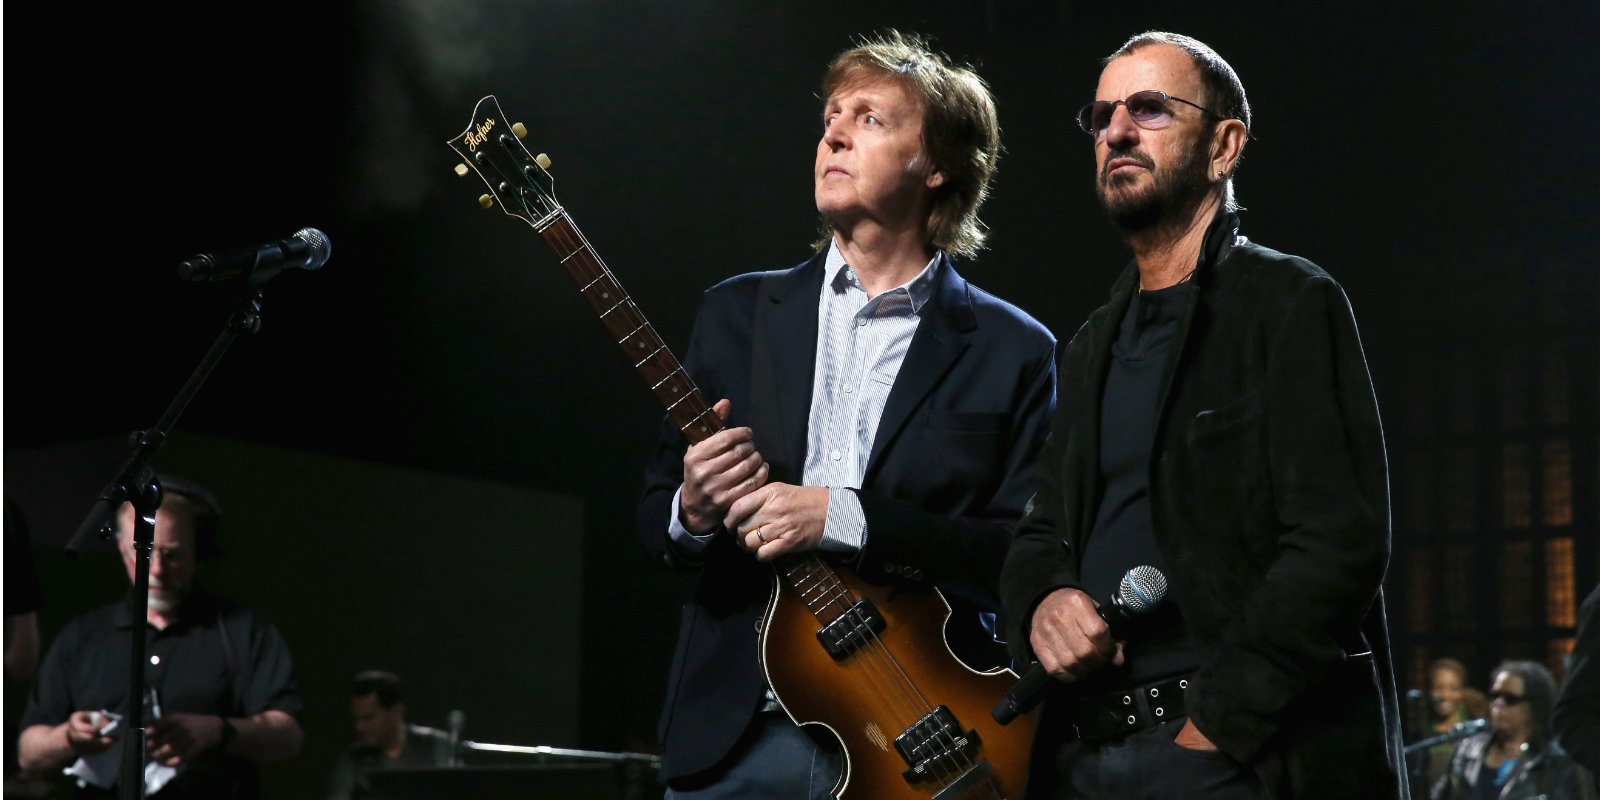 Paul McCartney and Ringo Starr pose for a photograph at the Rock and Roll Hall of Fame Induction Ceremony in 2015.